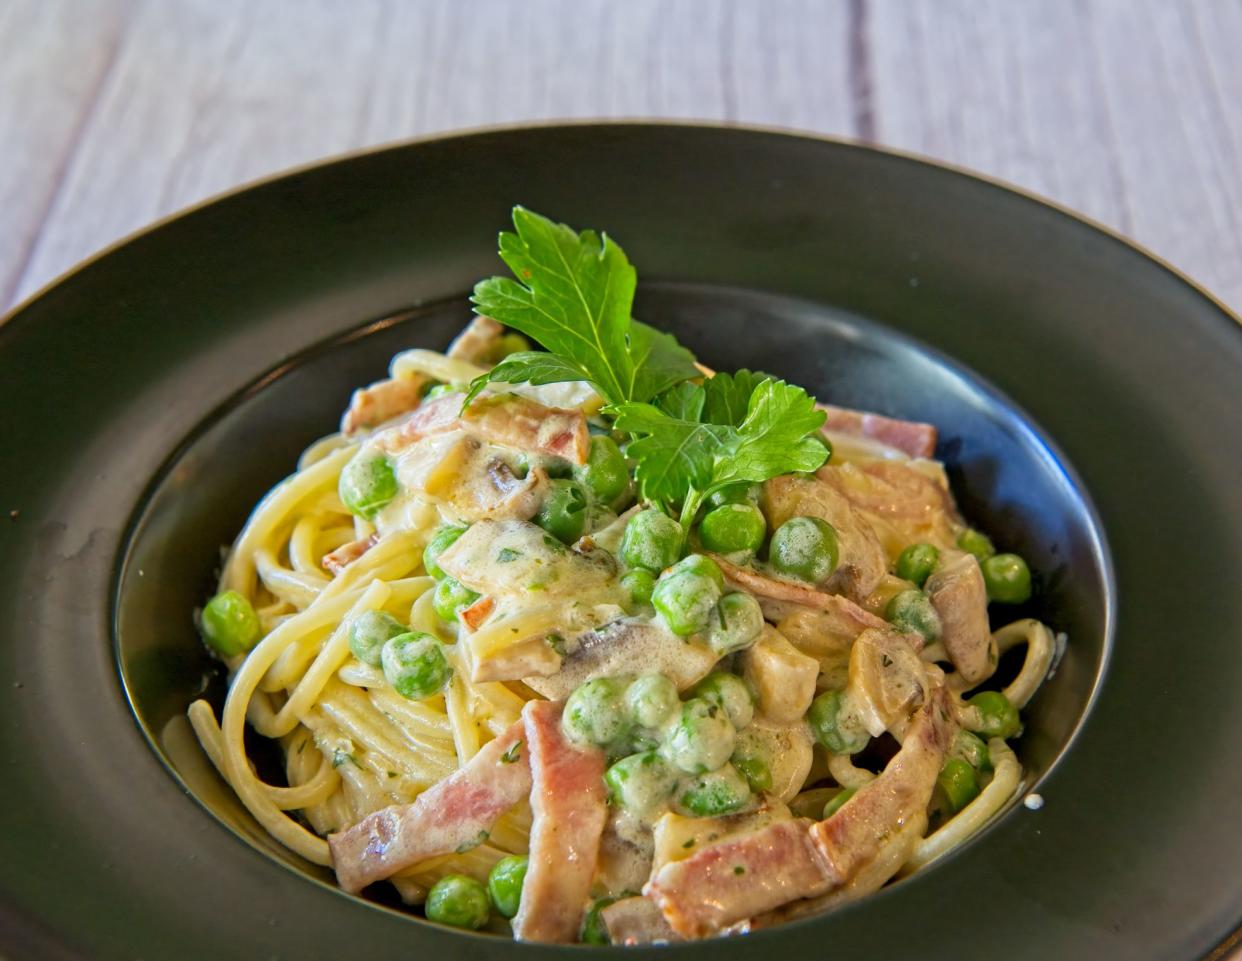 Tasty creamy pasta with bacon and green peas.